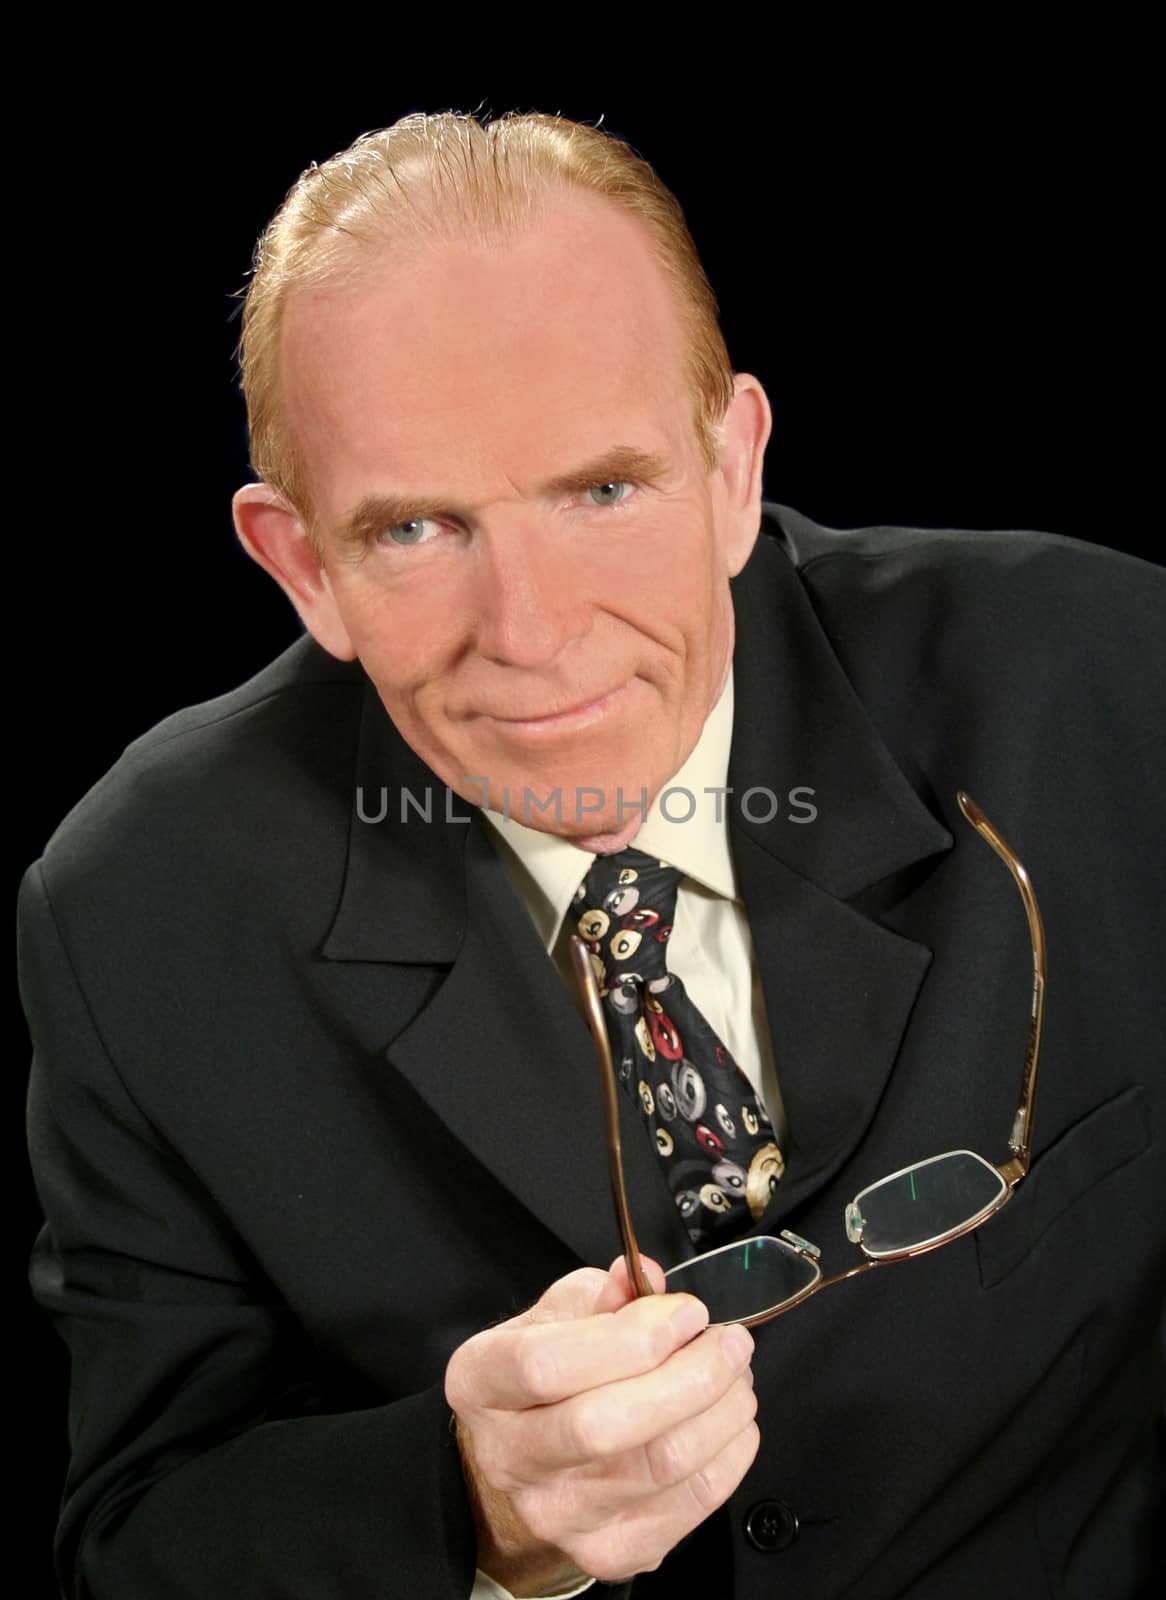 Middle aged businessman looking smug and holding glasses.